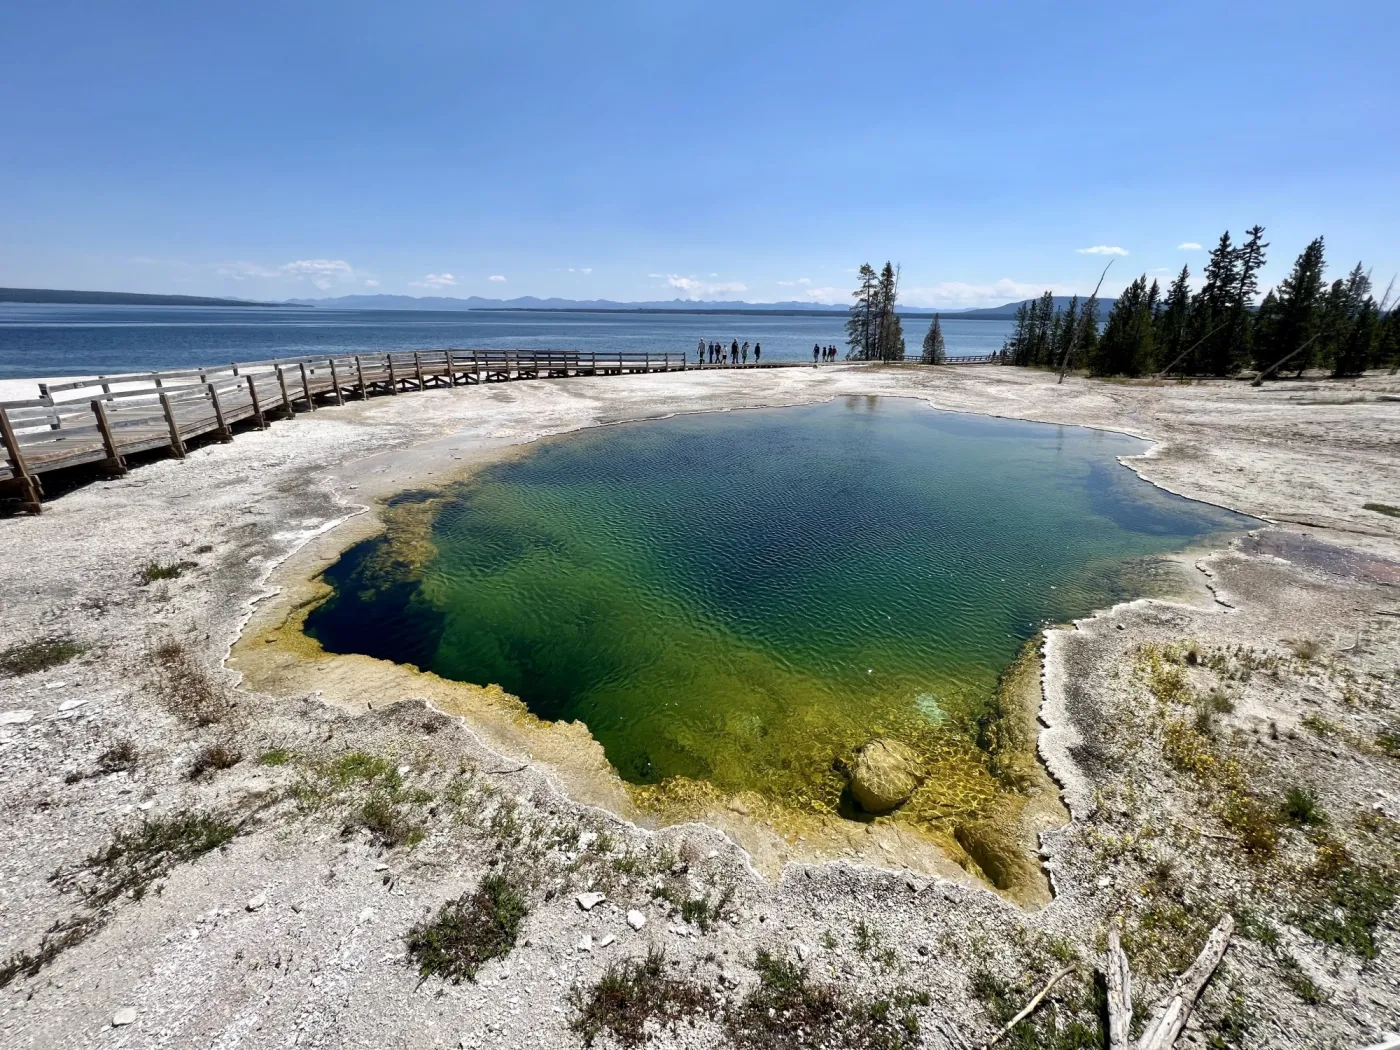 Yellowstone Lake and Other Lakes in Yellowstone